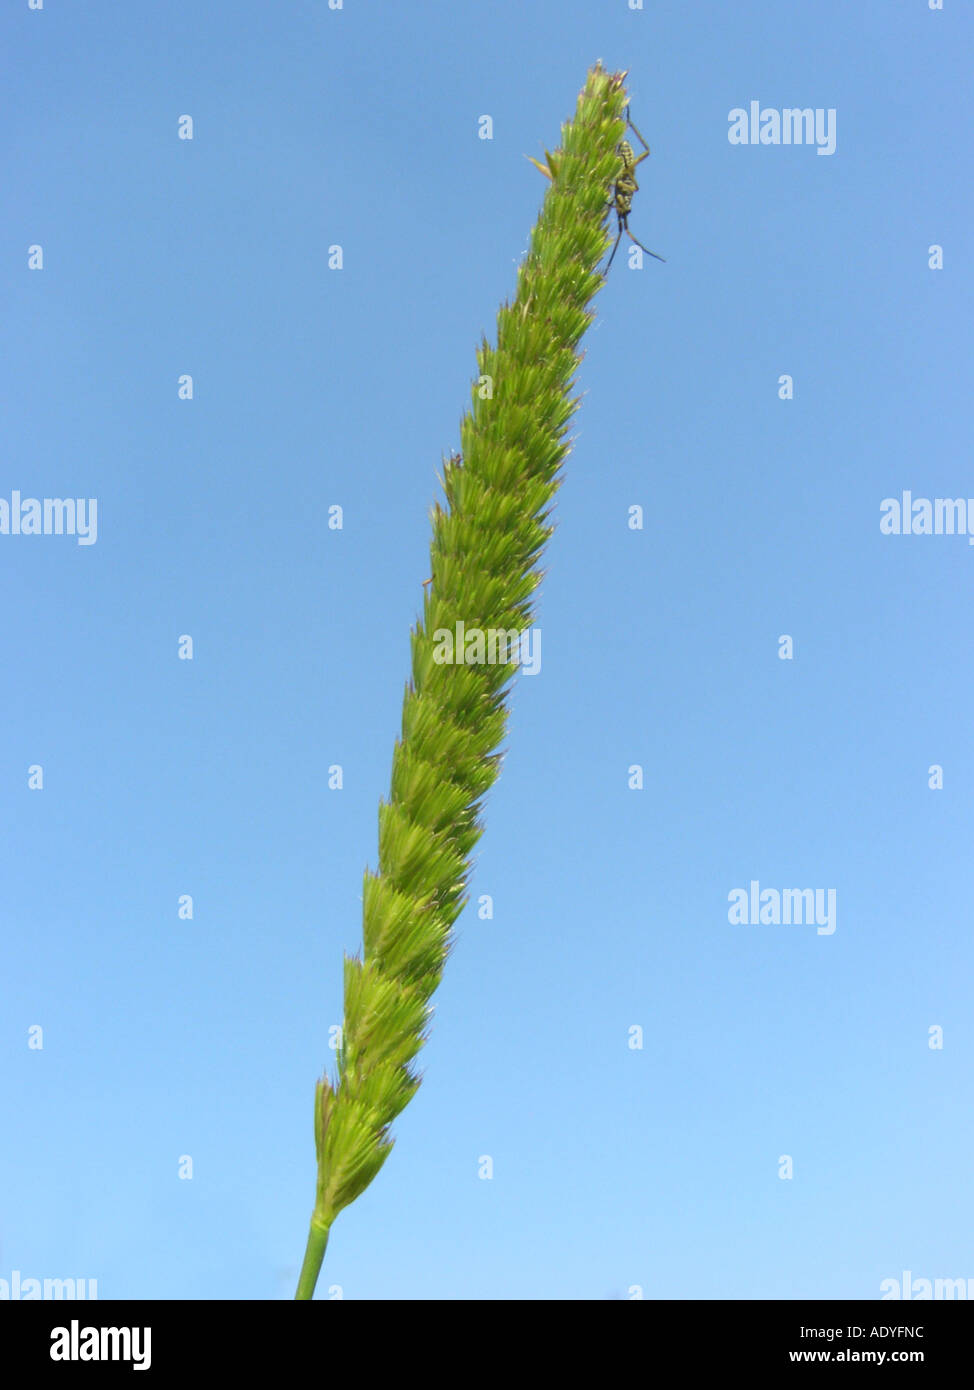 dog's-tail grass, crested dog's-tail (Cynosurus cristatus), inflorescence against blue sky Stock Photo